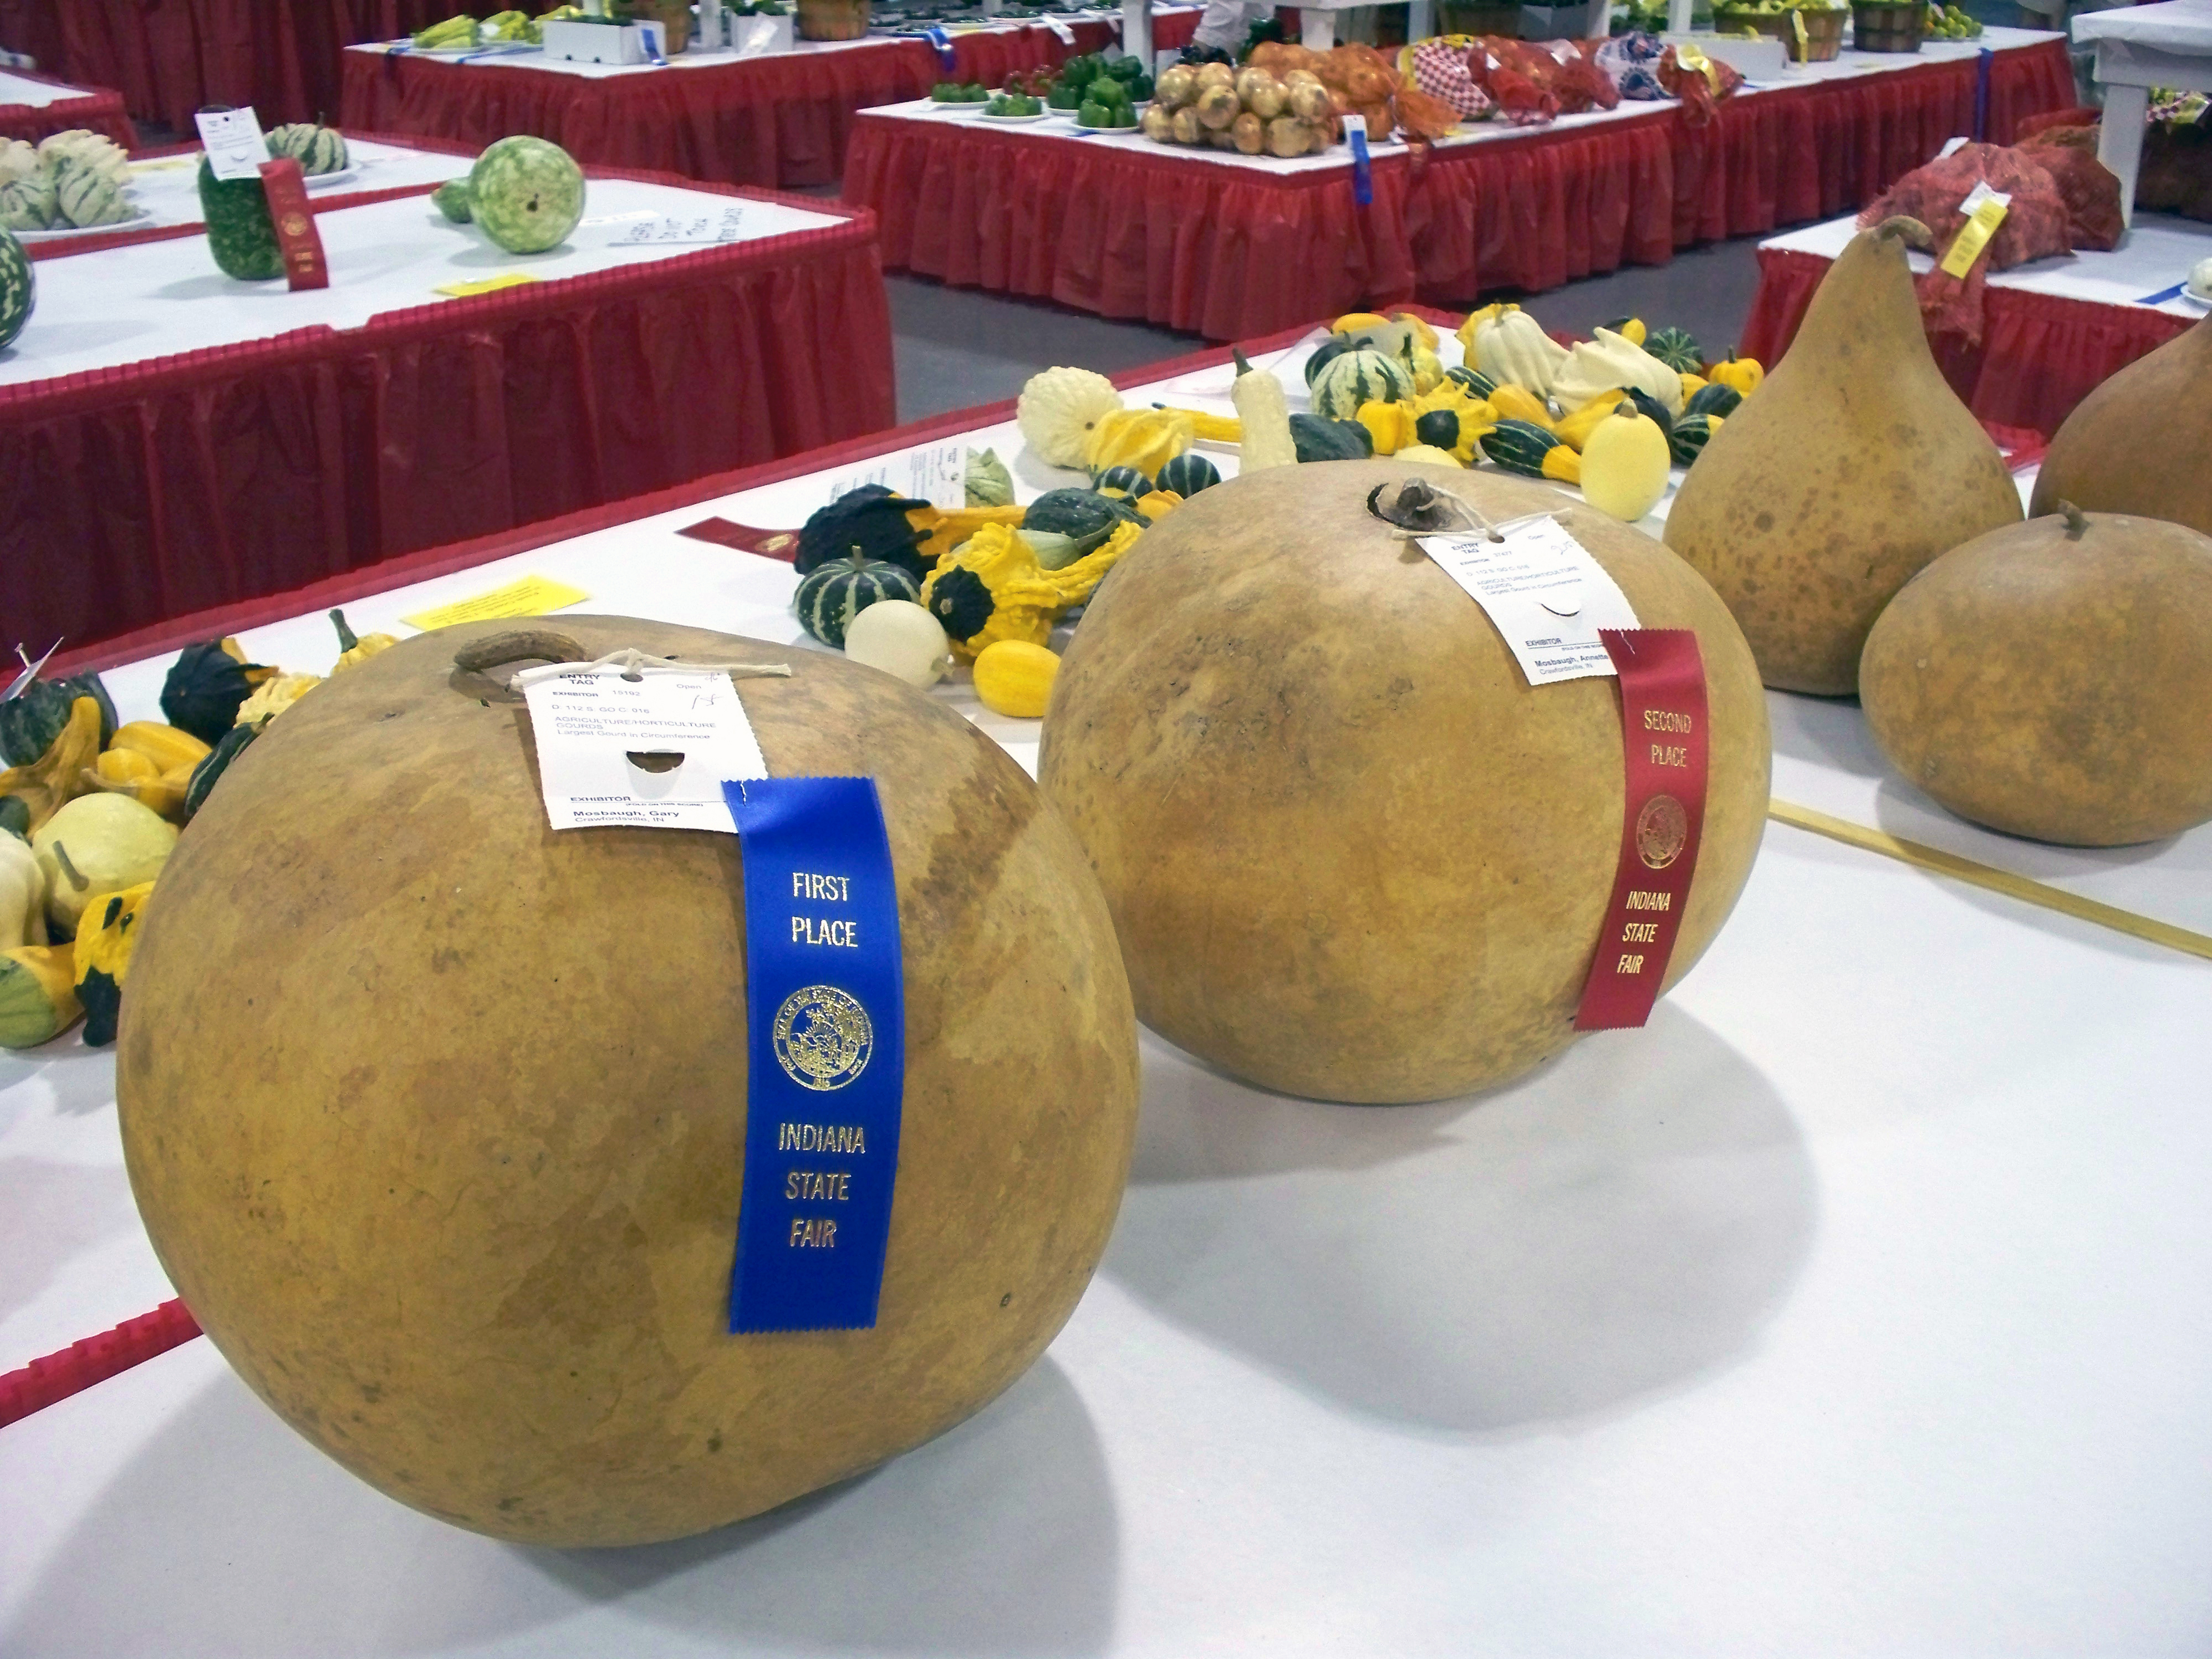 Photo of gourds at a fair with blue and red ribbons